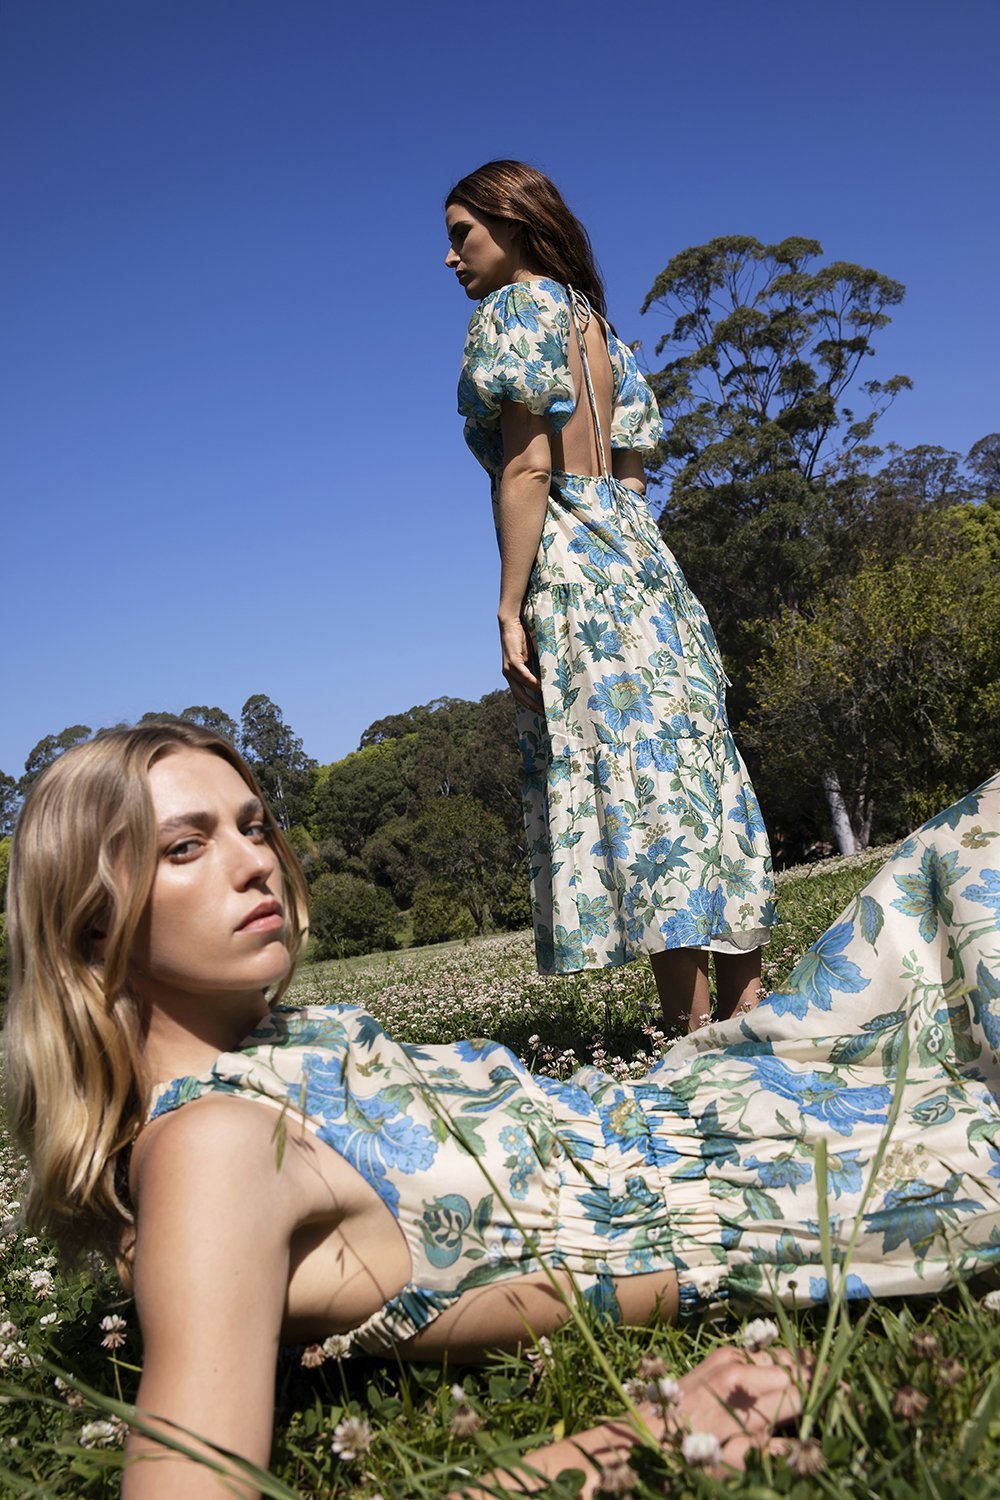 Models posing in grass with blue sky